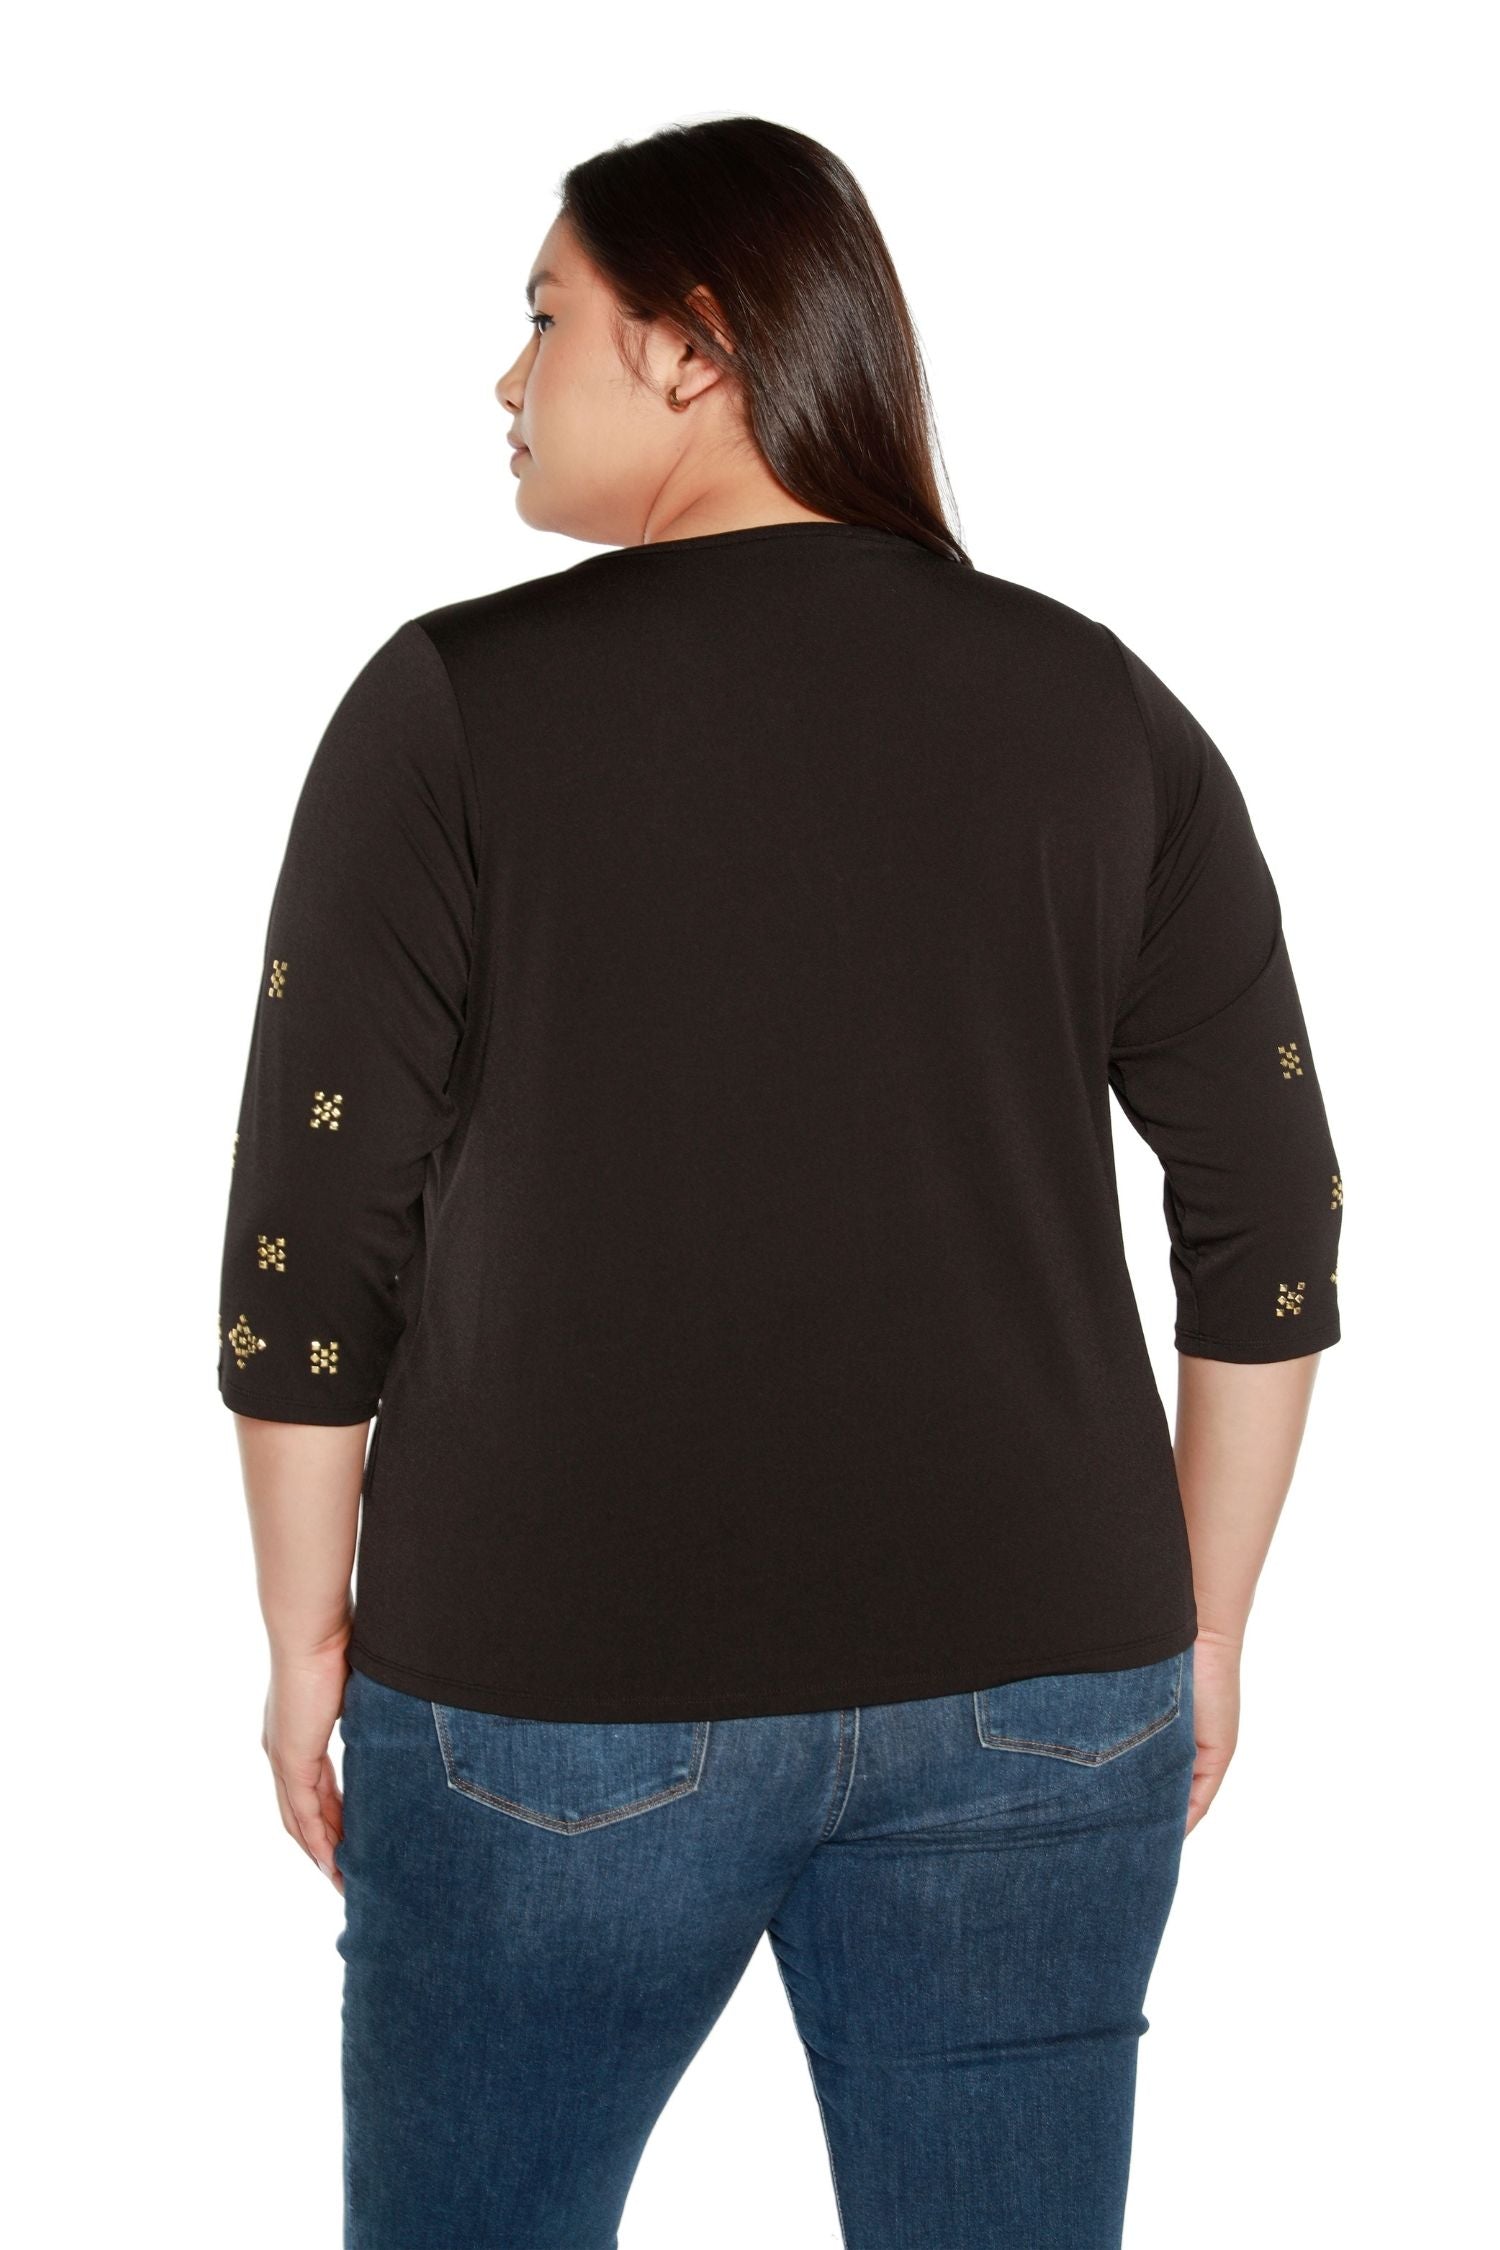 Women's Tunic with Gold Studs and Keyhole Neckline with Gold Bar | Curvy